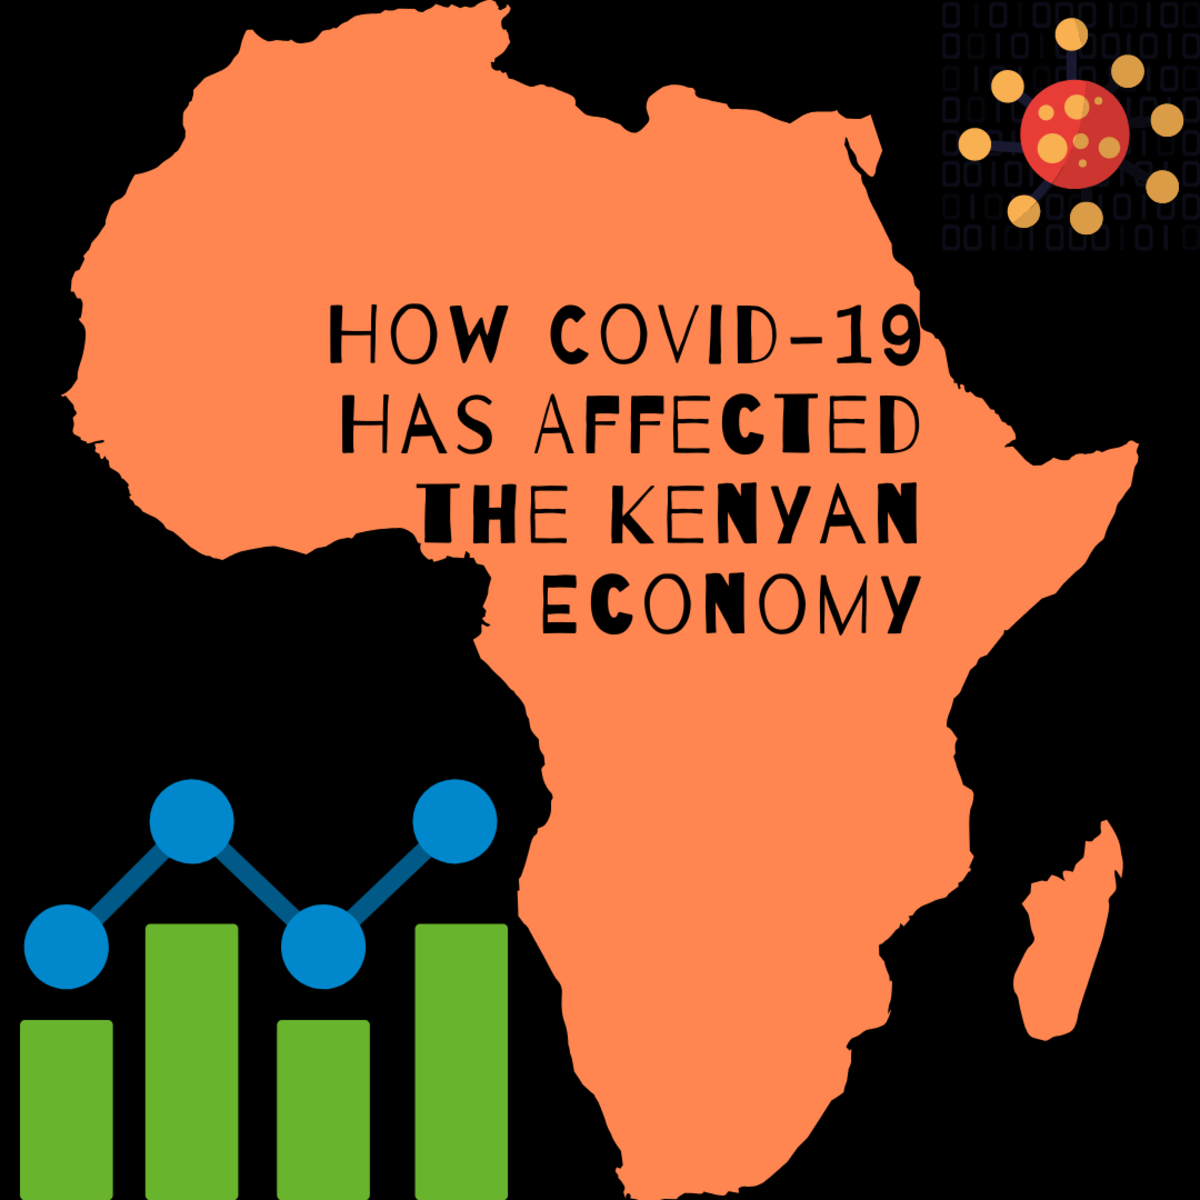 How Covid-19 Has Affected the Kenyan Economy